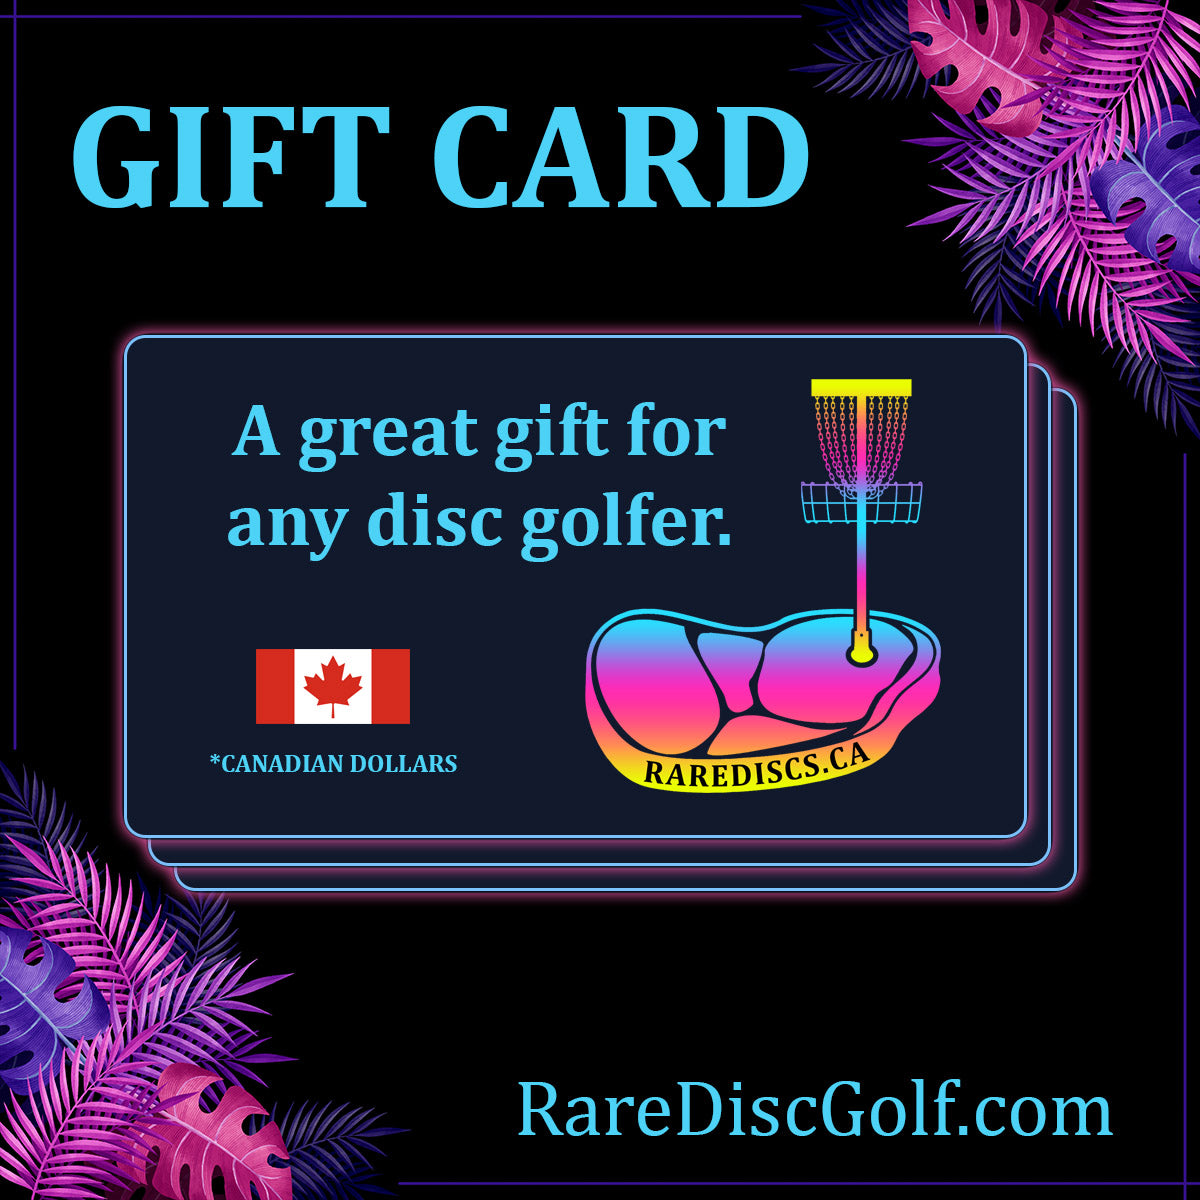 Disc golf frisbee supply store shop canada canadian gift card certificate giftcard christmas holiday birthday rare unique rarediscs berg